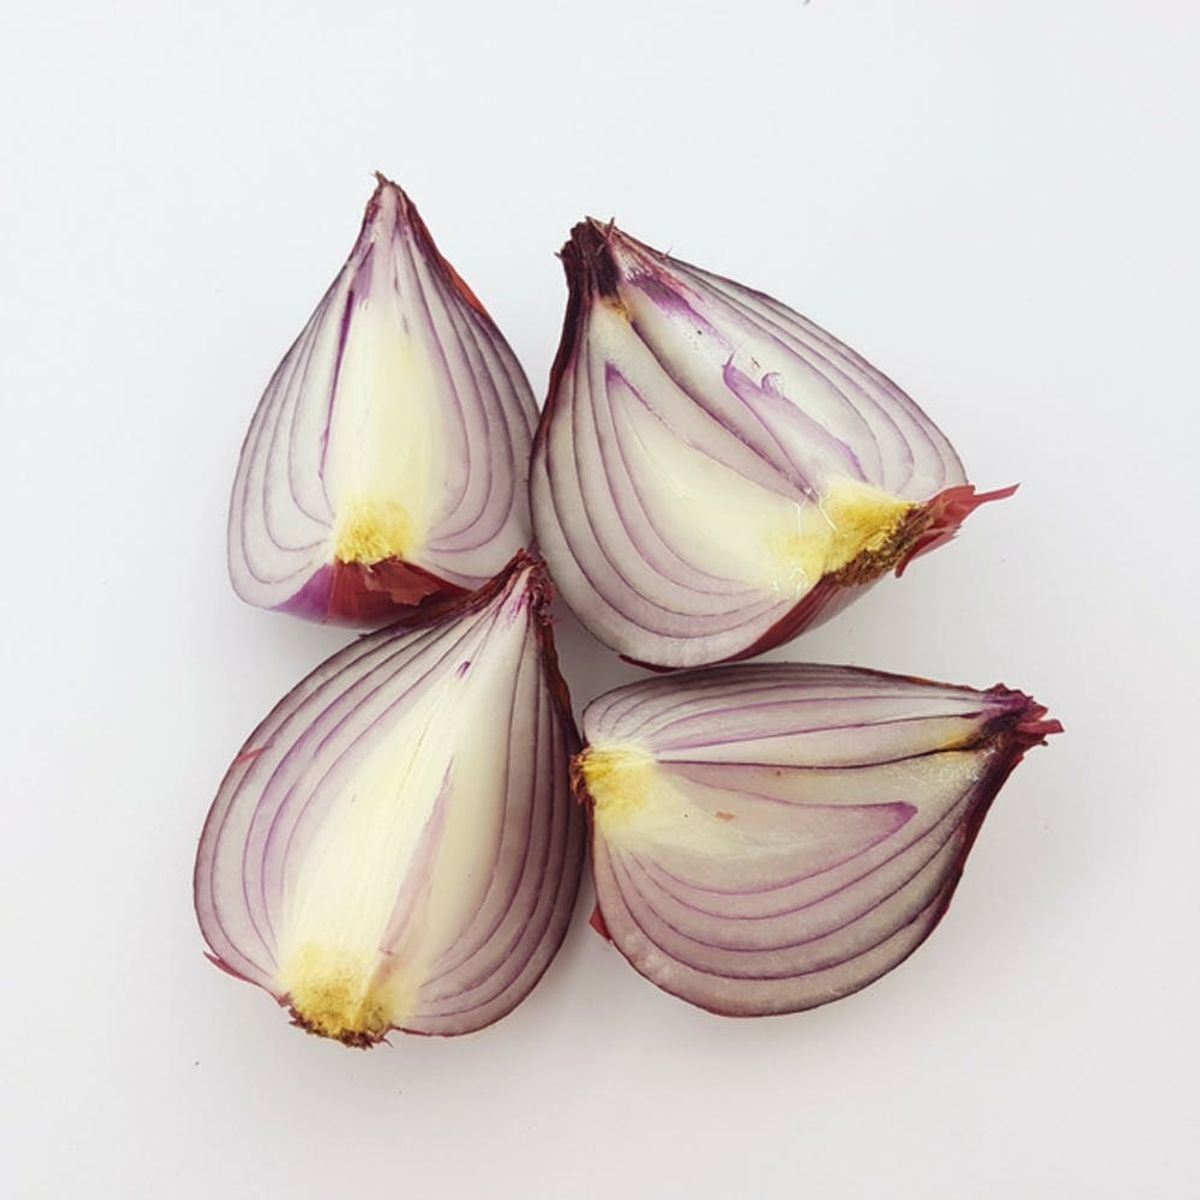 Why You Should Start Freezing Your Onions *Immediately*